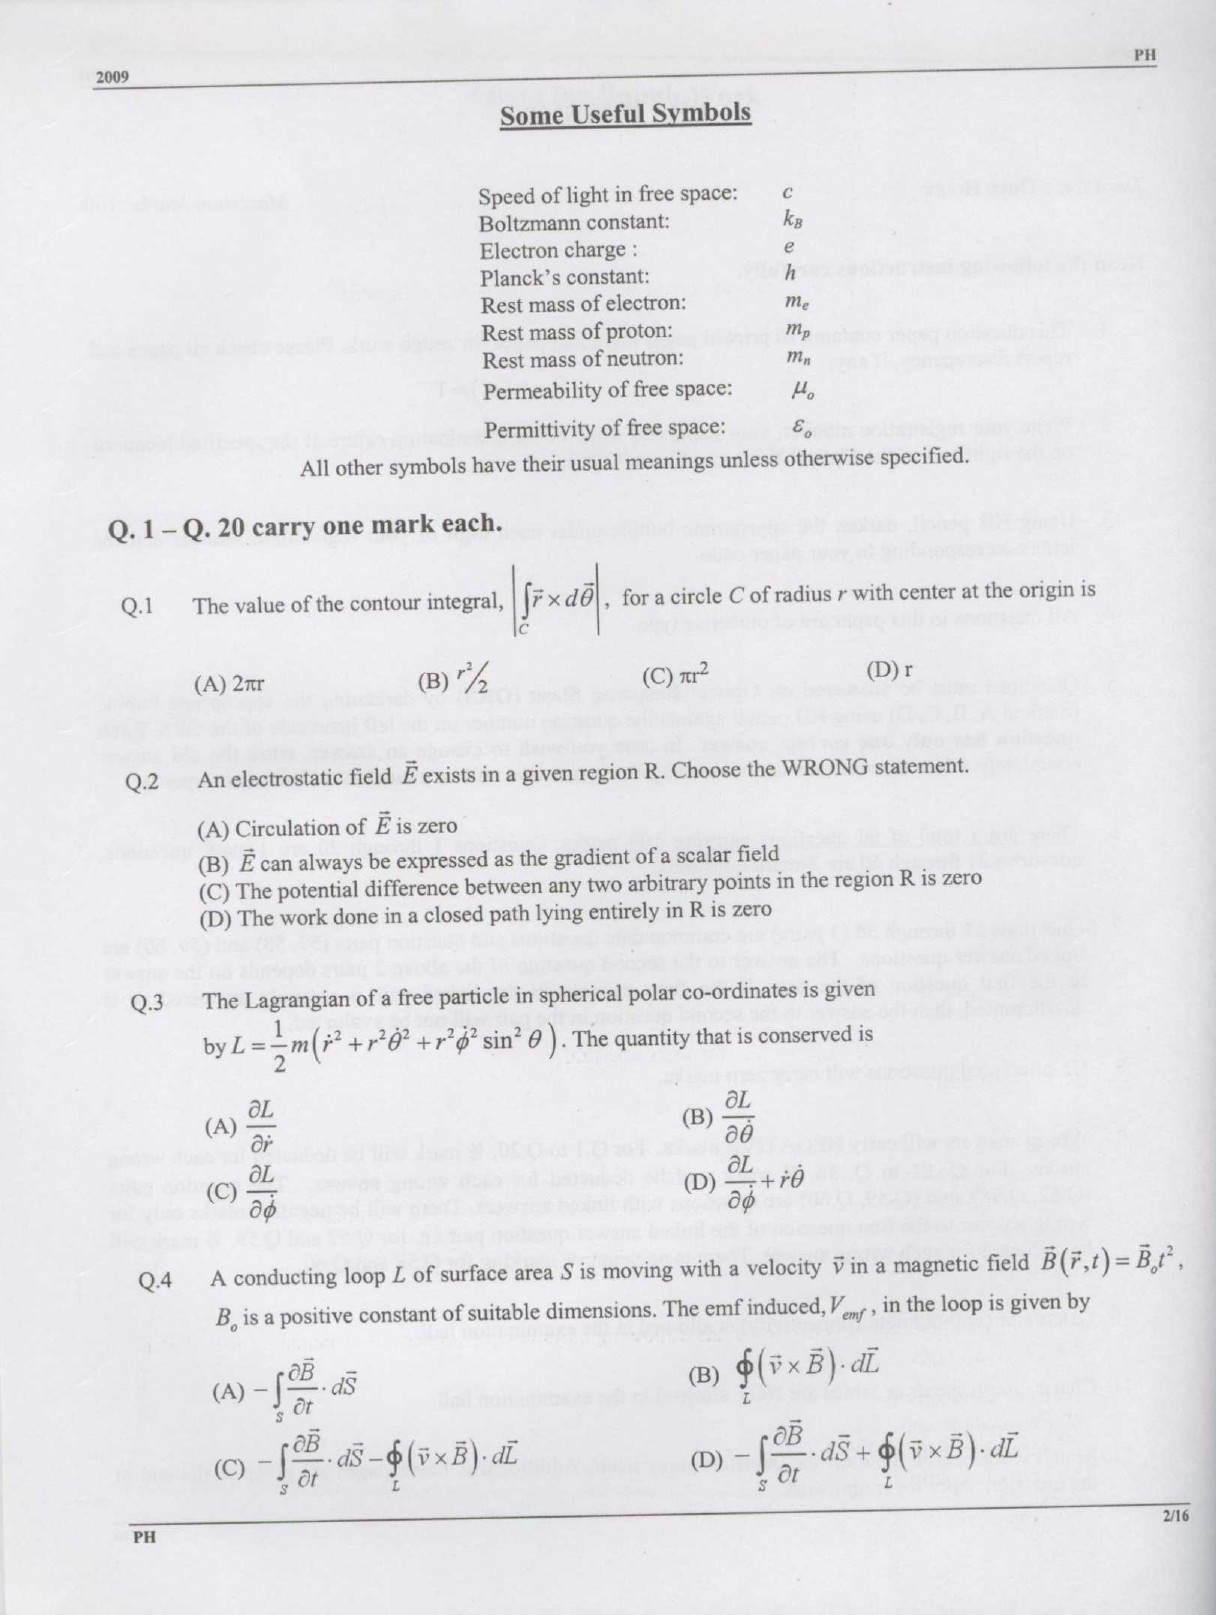 GATE Exam Question Paper 2009 Physics 2